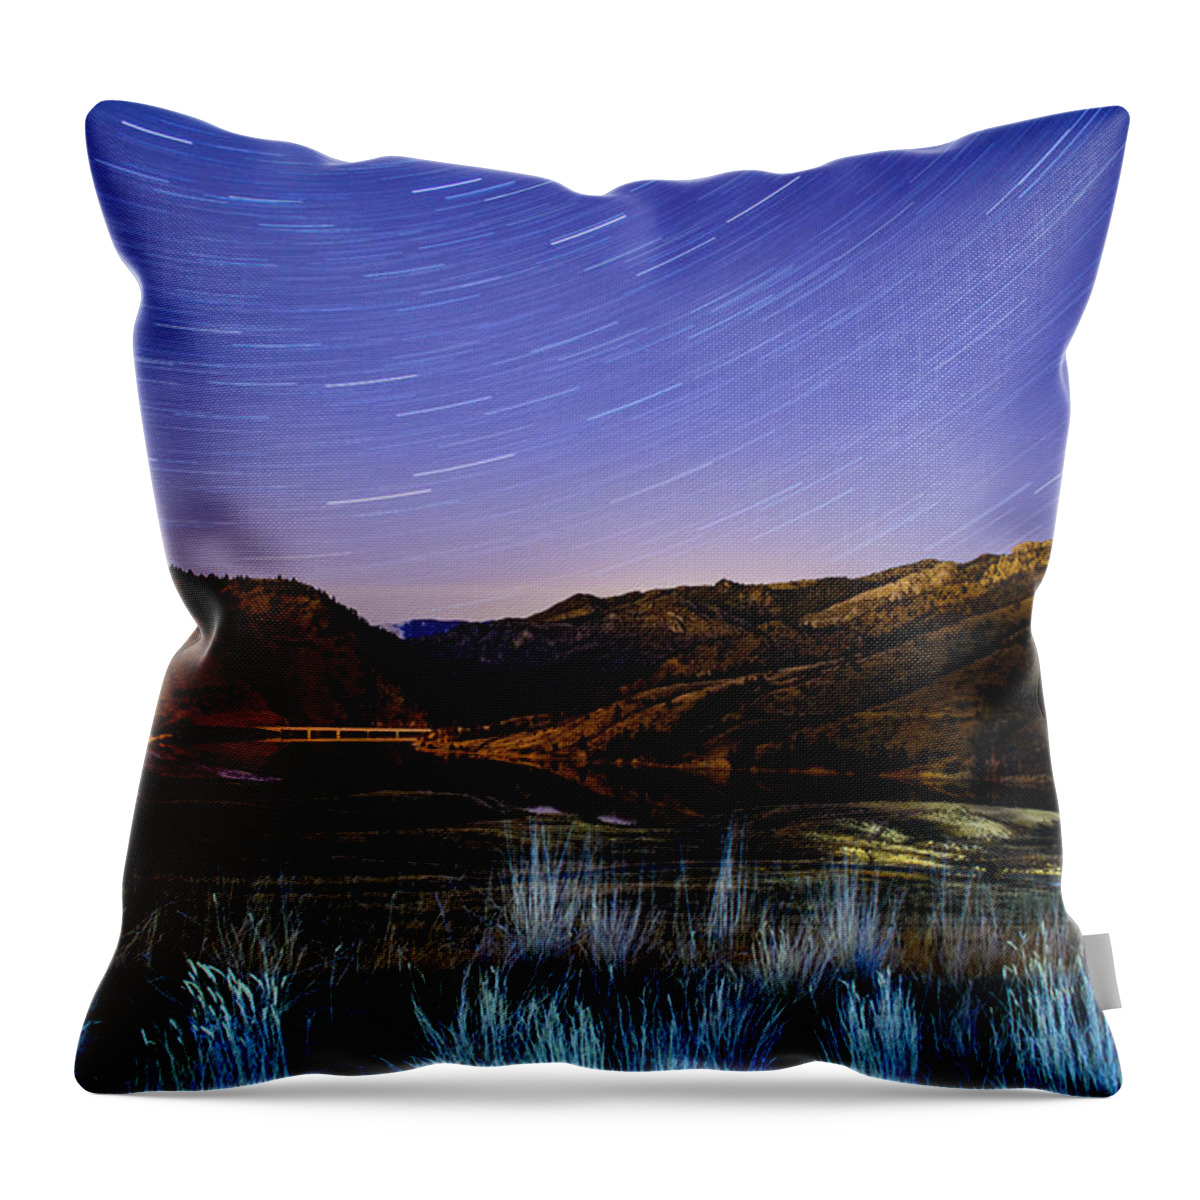 Nightscape Throw Pillow featuring the photograph Star Trails over Hauser by Tory Stephens